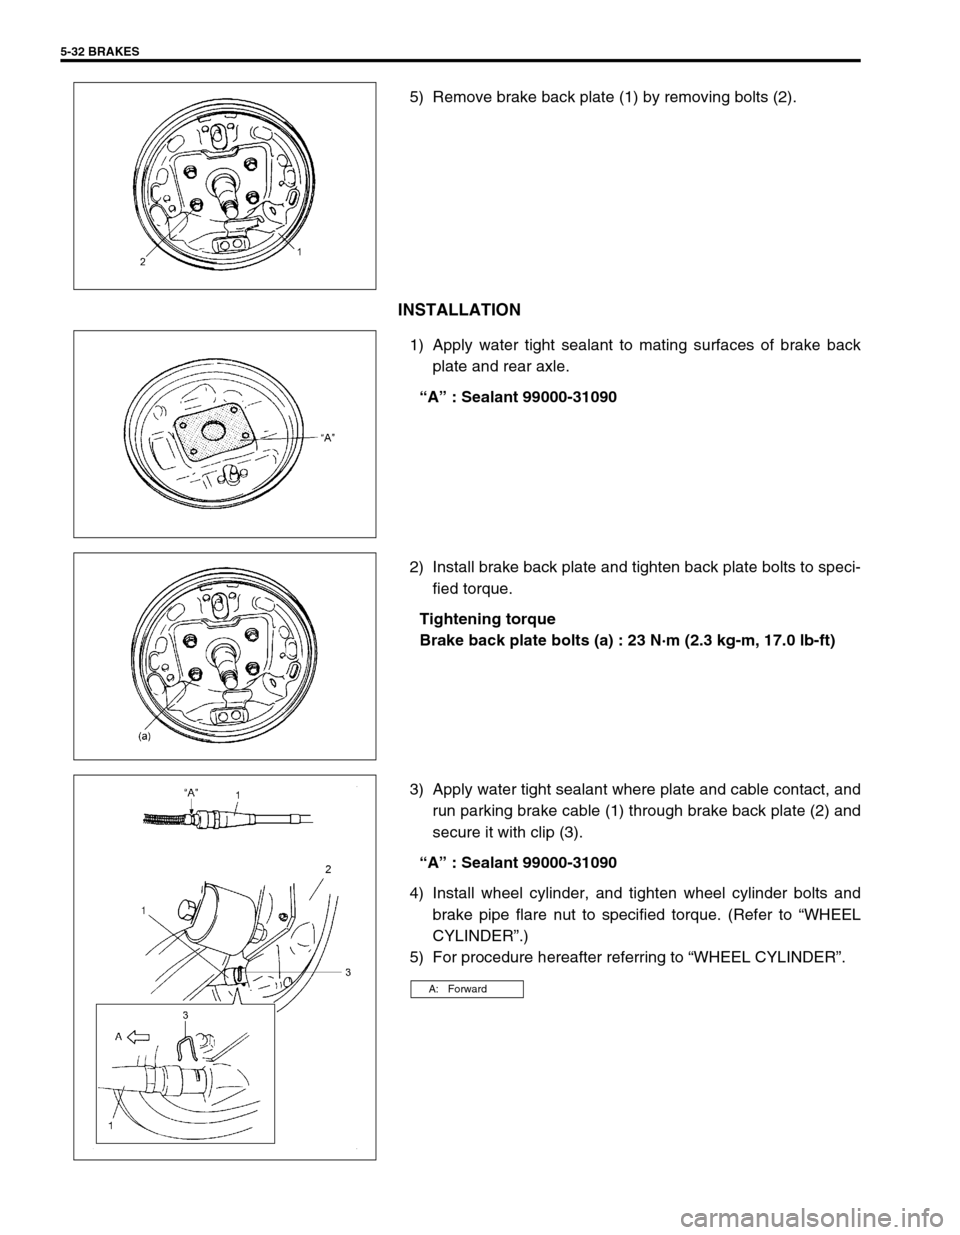 SUZUKI SWIFT 2000 1.G RG413 Service Owners Manual 5-32 BRAKES
5) Remove brake back plate (1) by removing bolts (2).
INSTALLATION
1) Apply water tight sealant to mating surfaces of brake back
plate and rear axle.
“A” : Sealant 99000-31090
2) Insta